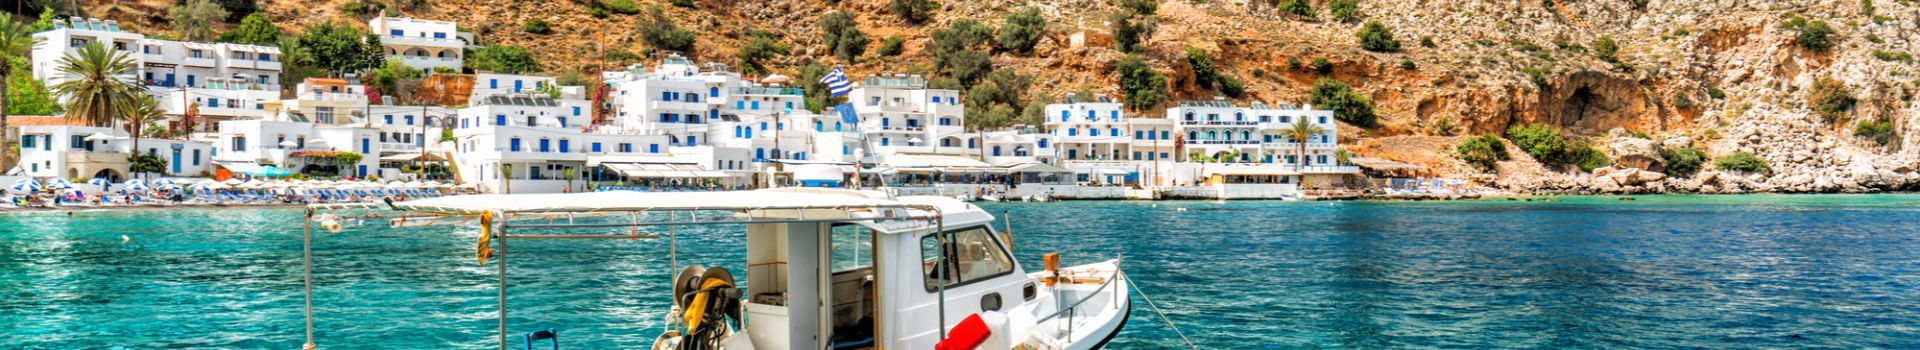 Holidays to Crete | Book Flight & Hotel with Cassidy Travel